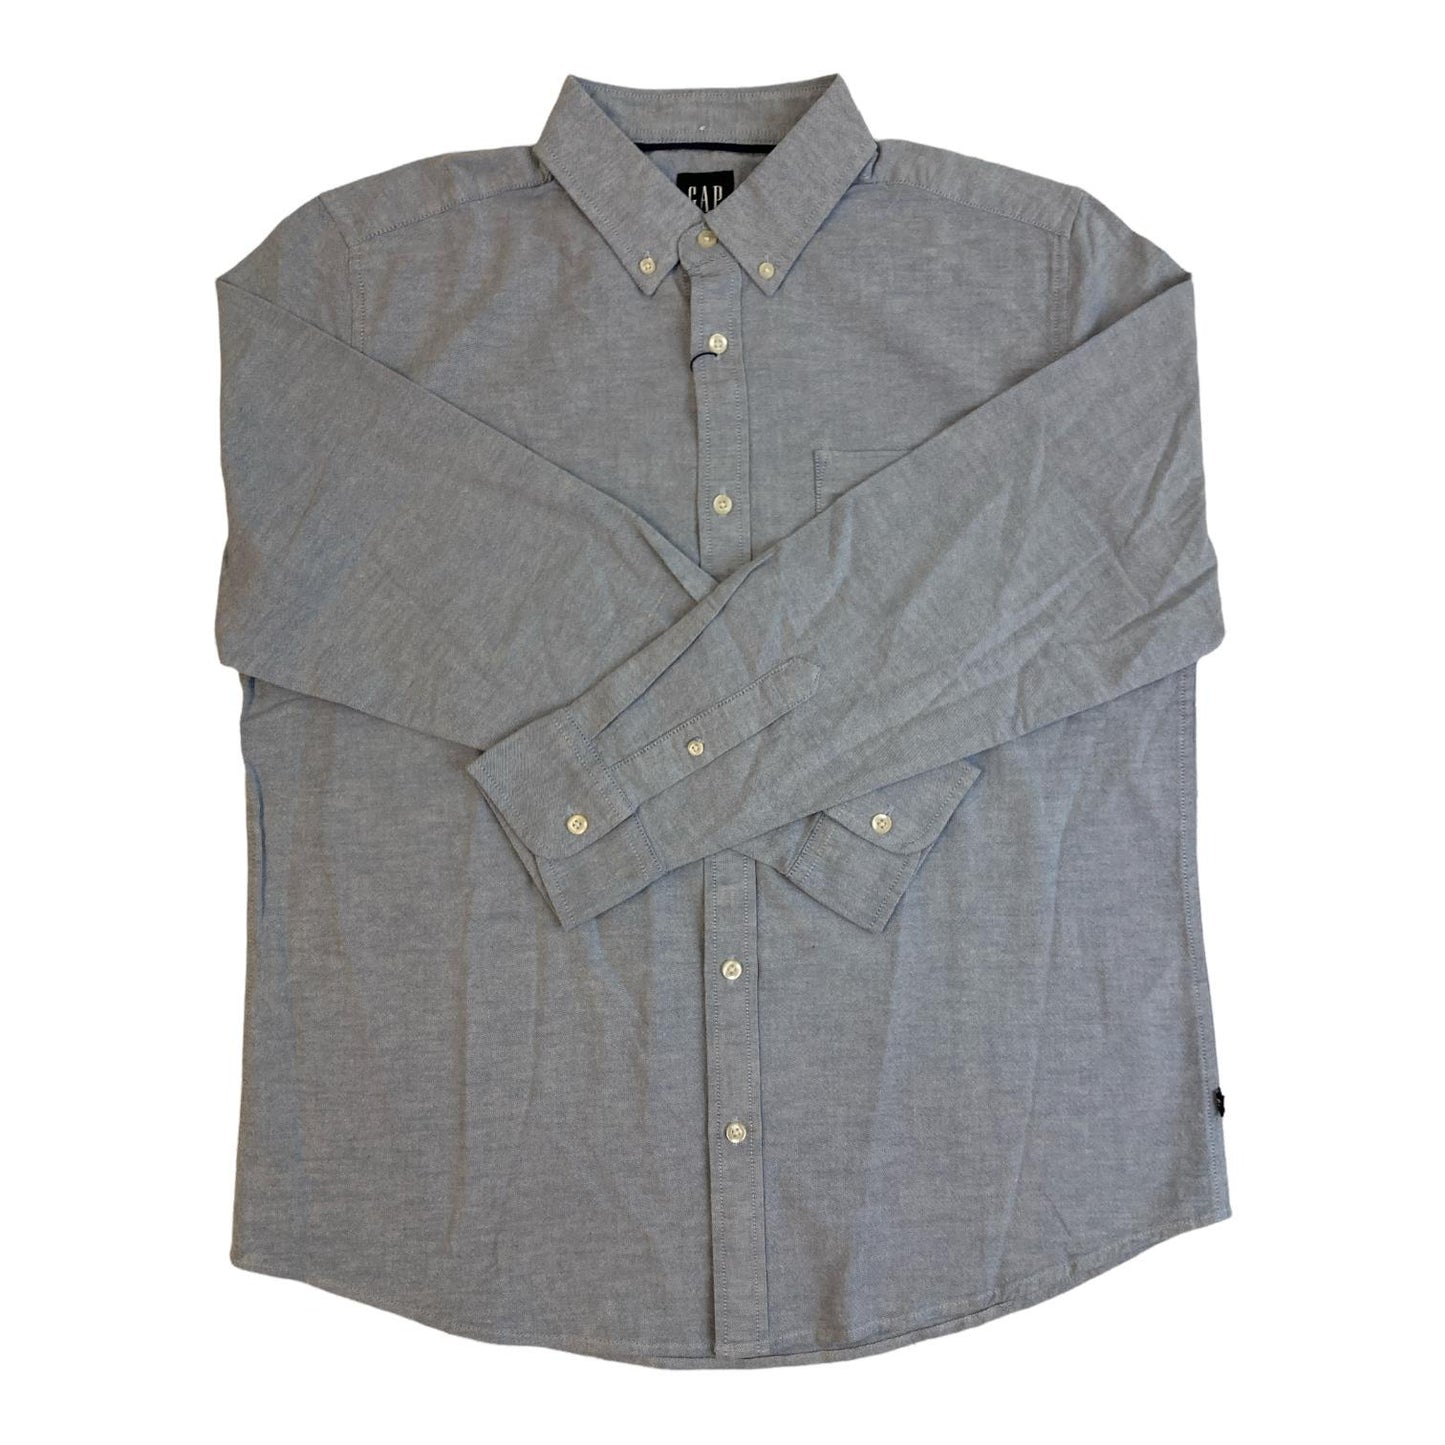 Gap Men's Long Sleeve Easy Relaxed Fit Button-Down Oxford Shirt